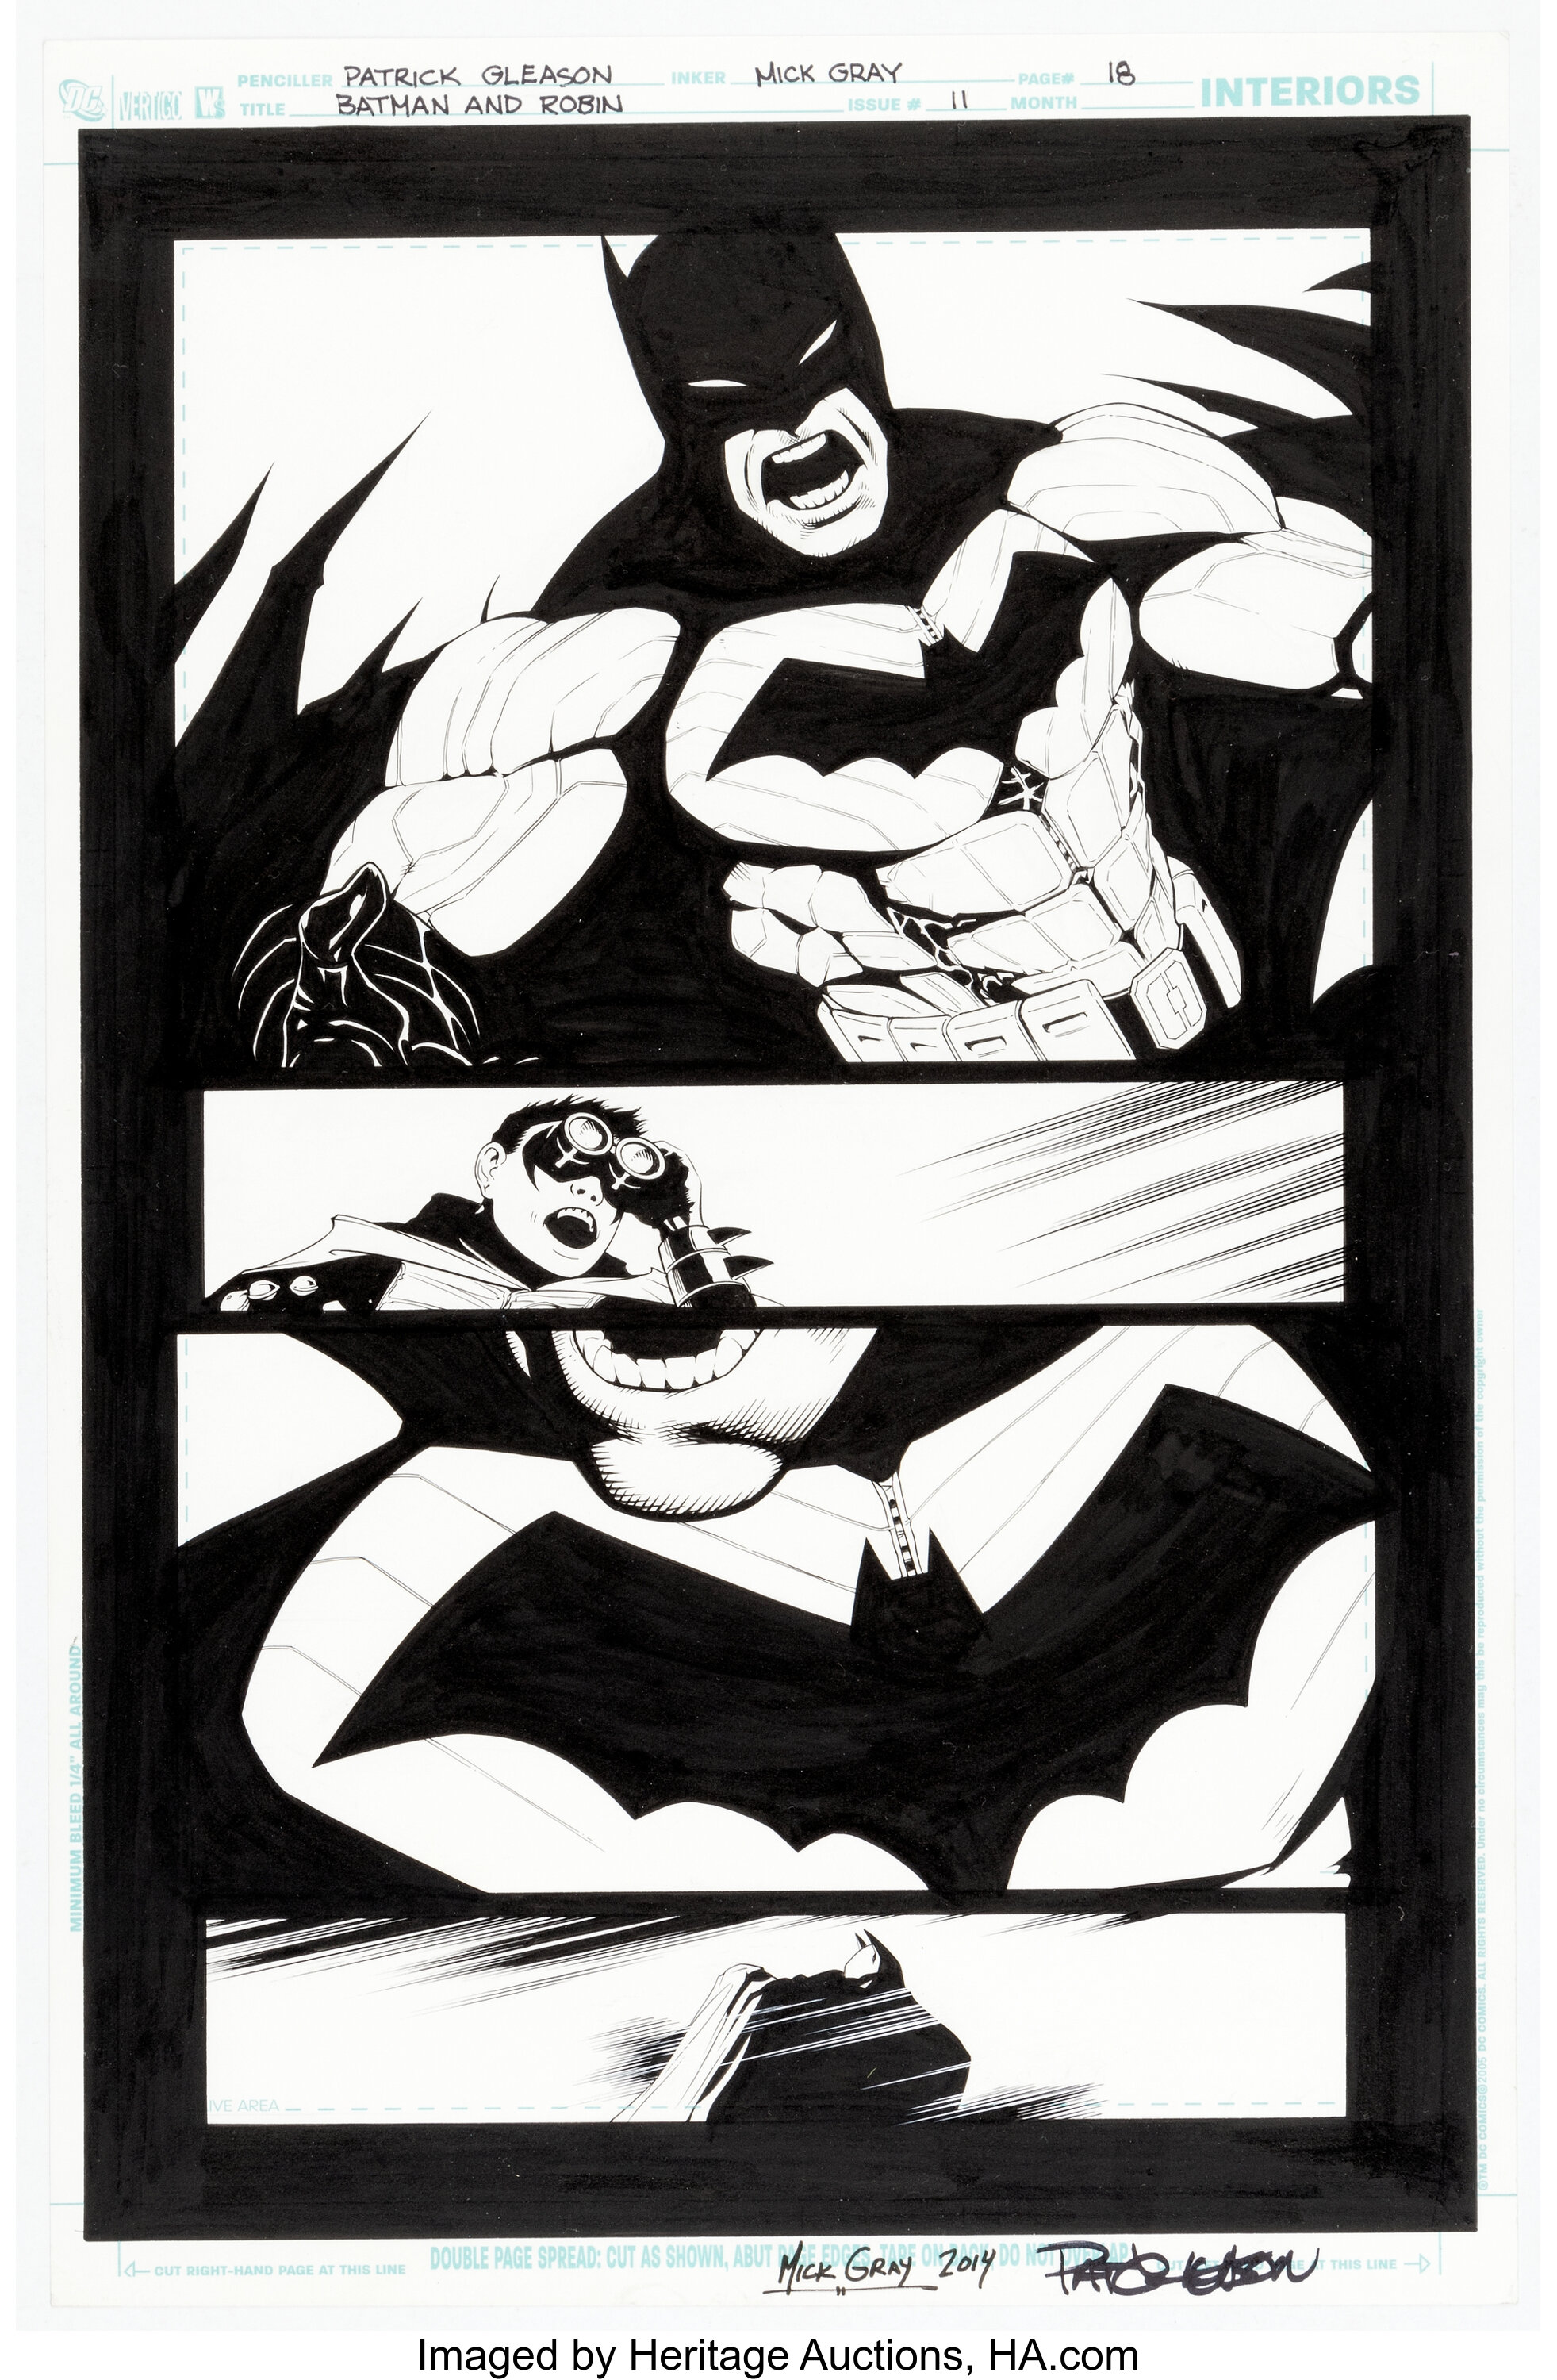 Patrick Gleason and Mick Gray Batman and Robin #11 Story Page 18 | Lot  #11735 | Heritage Auctions